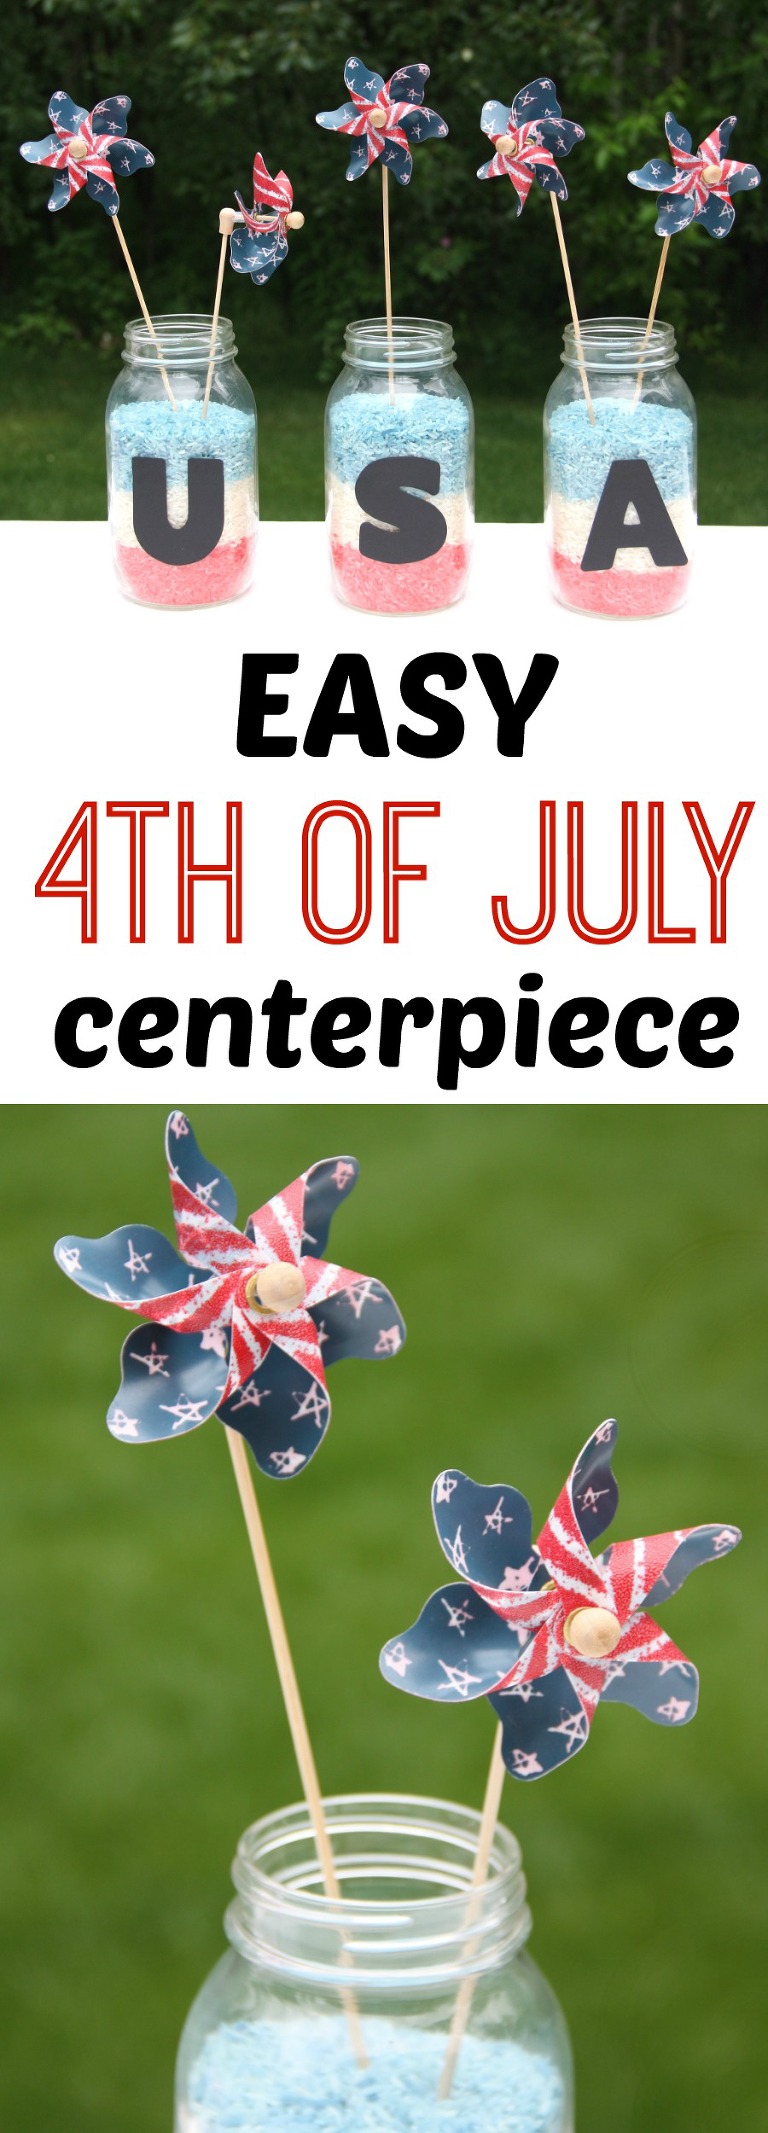 easy fourth of july centerpiece